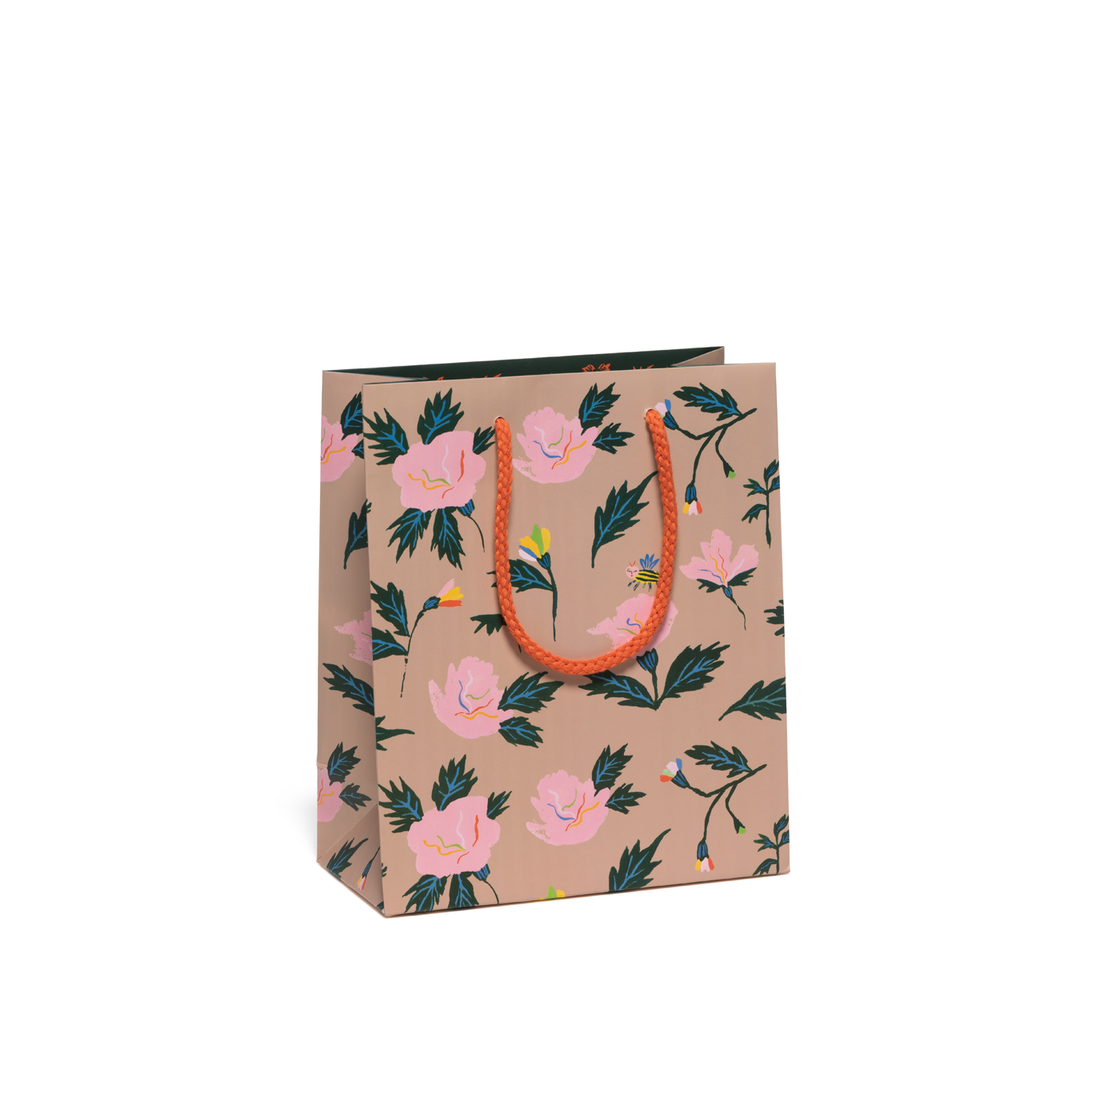 Image of gift bag with tan background with images of pink and yellow flowers with green stems and leaves with orange cord handle. 